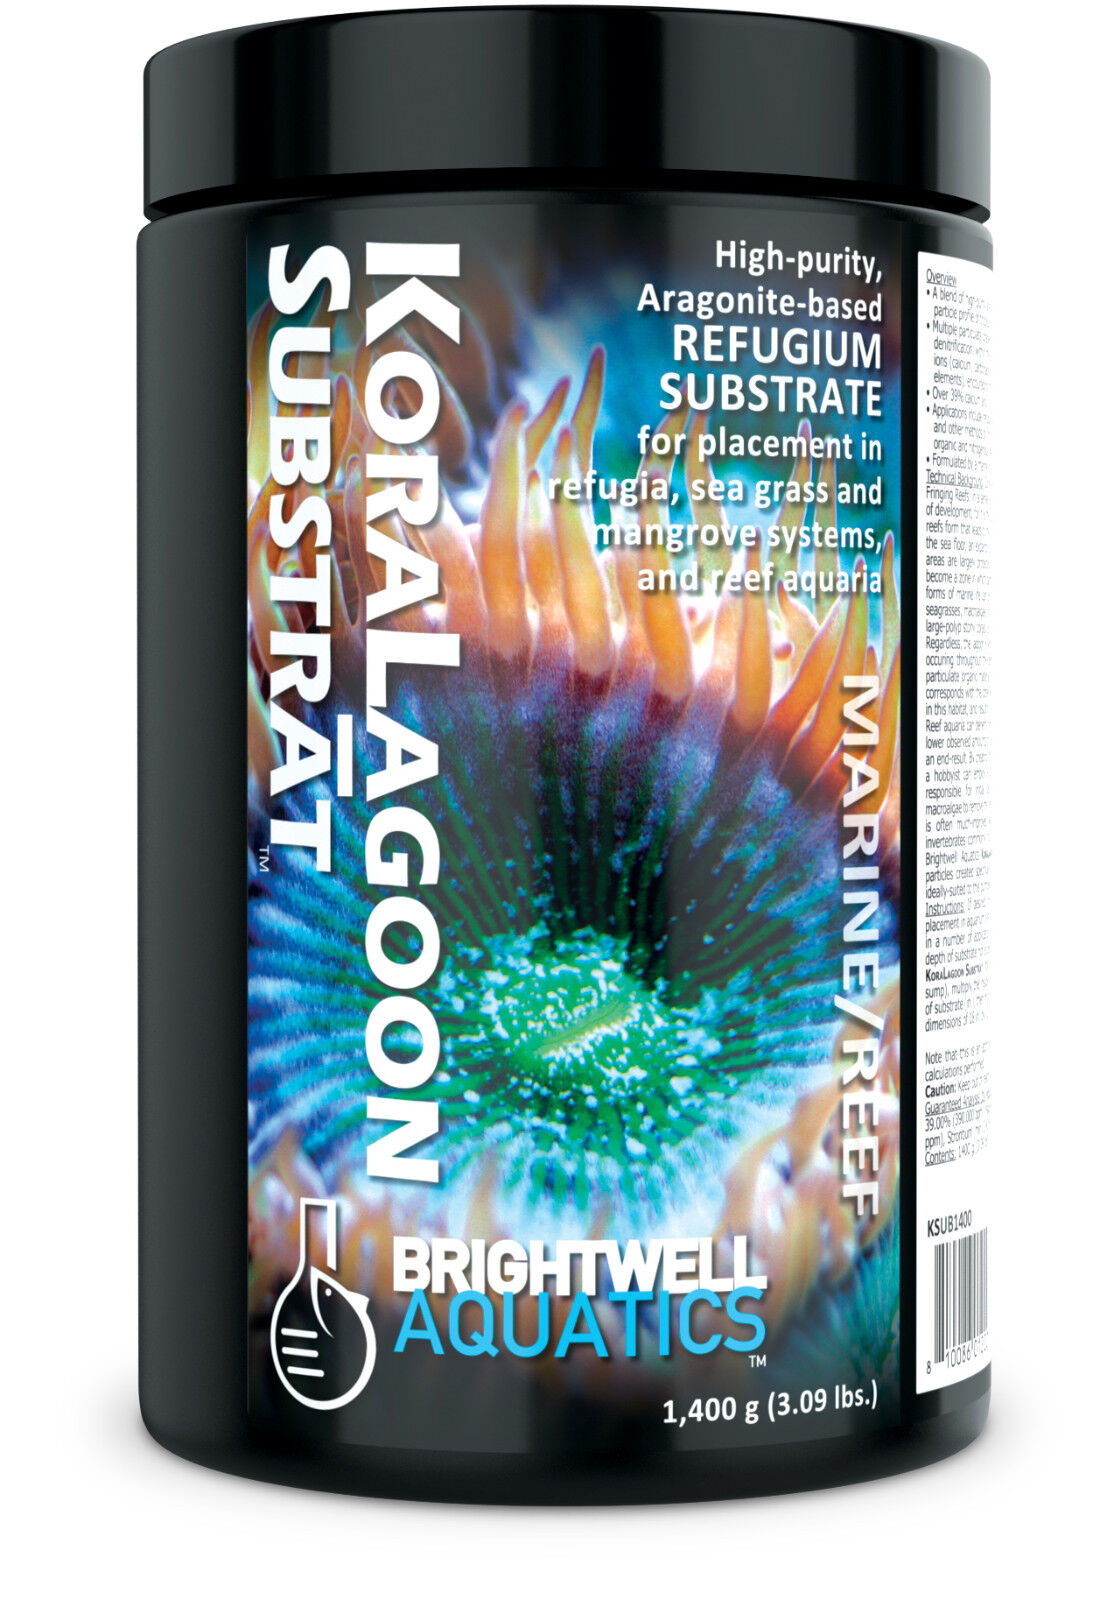 Brightwell Aquatics KoraLagoon substrate 1 Ranking Limited time cheap sale integrated 1st place 4kg